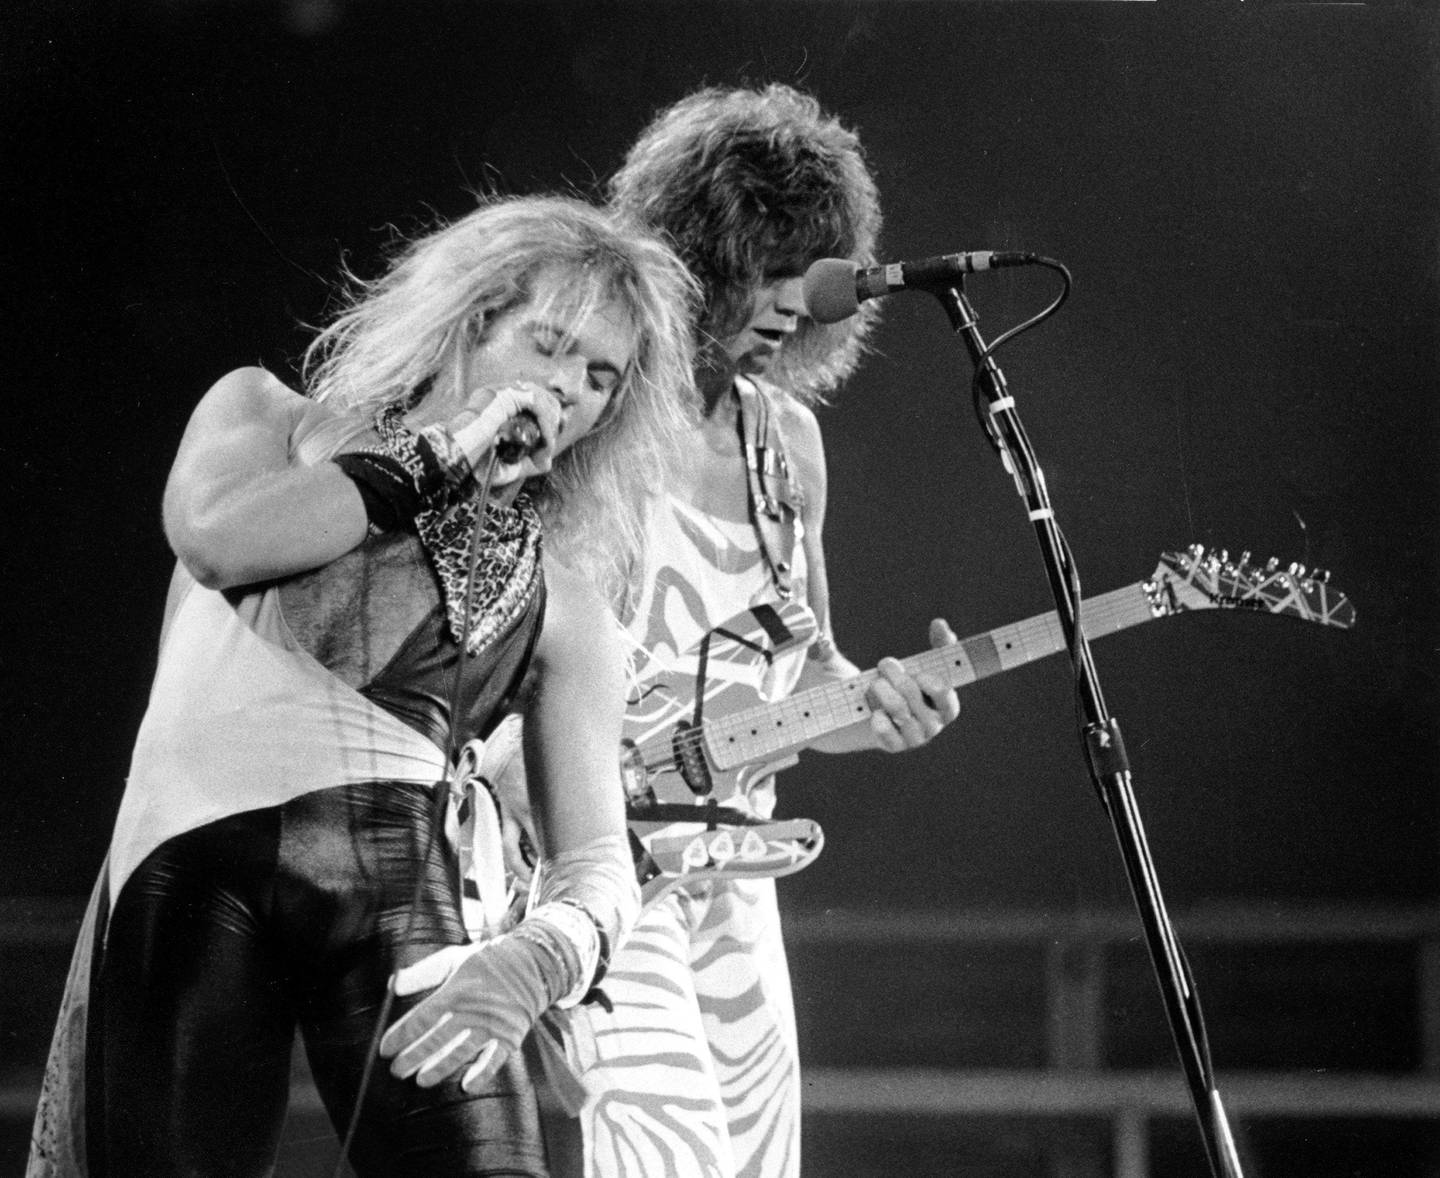 ** FILE ** Lead singer David Lee Roth, left, and lead guitarist  Eddie Van Halen of the rock group Van Halen perform during the concert at the spectrum in Philadelphia in this Oct. 19, 1982 file photo. The rockers have re-formed with original frontman David Lee Roth and will set out on a national tour beginning in October, 2007, according to a report posted Wednesday, Aug. 8, 2007 on Billboard Magazine's Web site. (AP Photo0